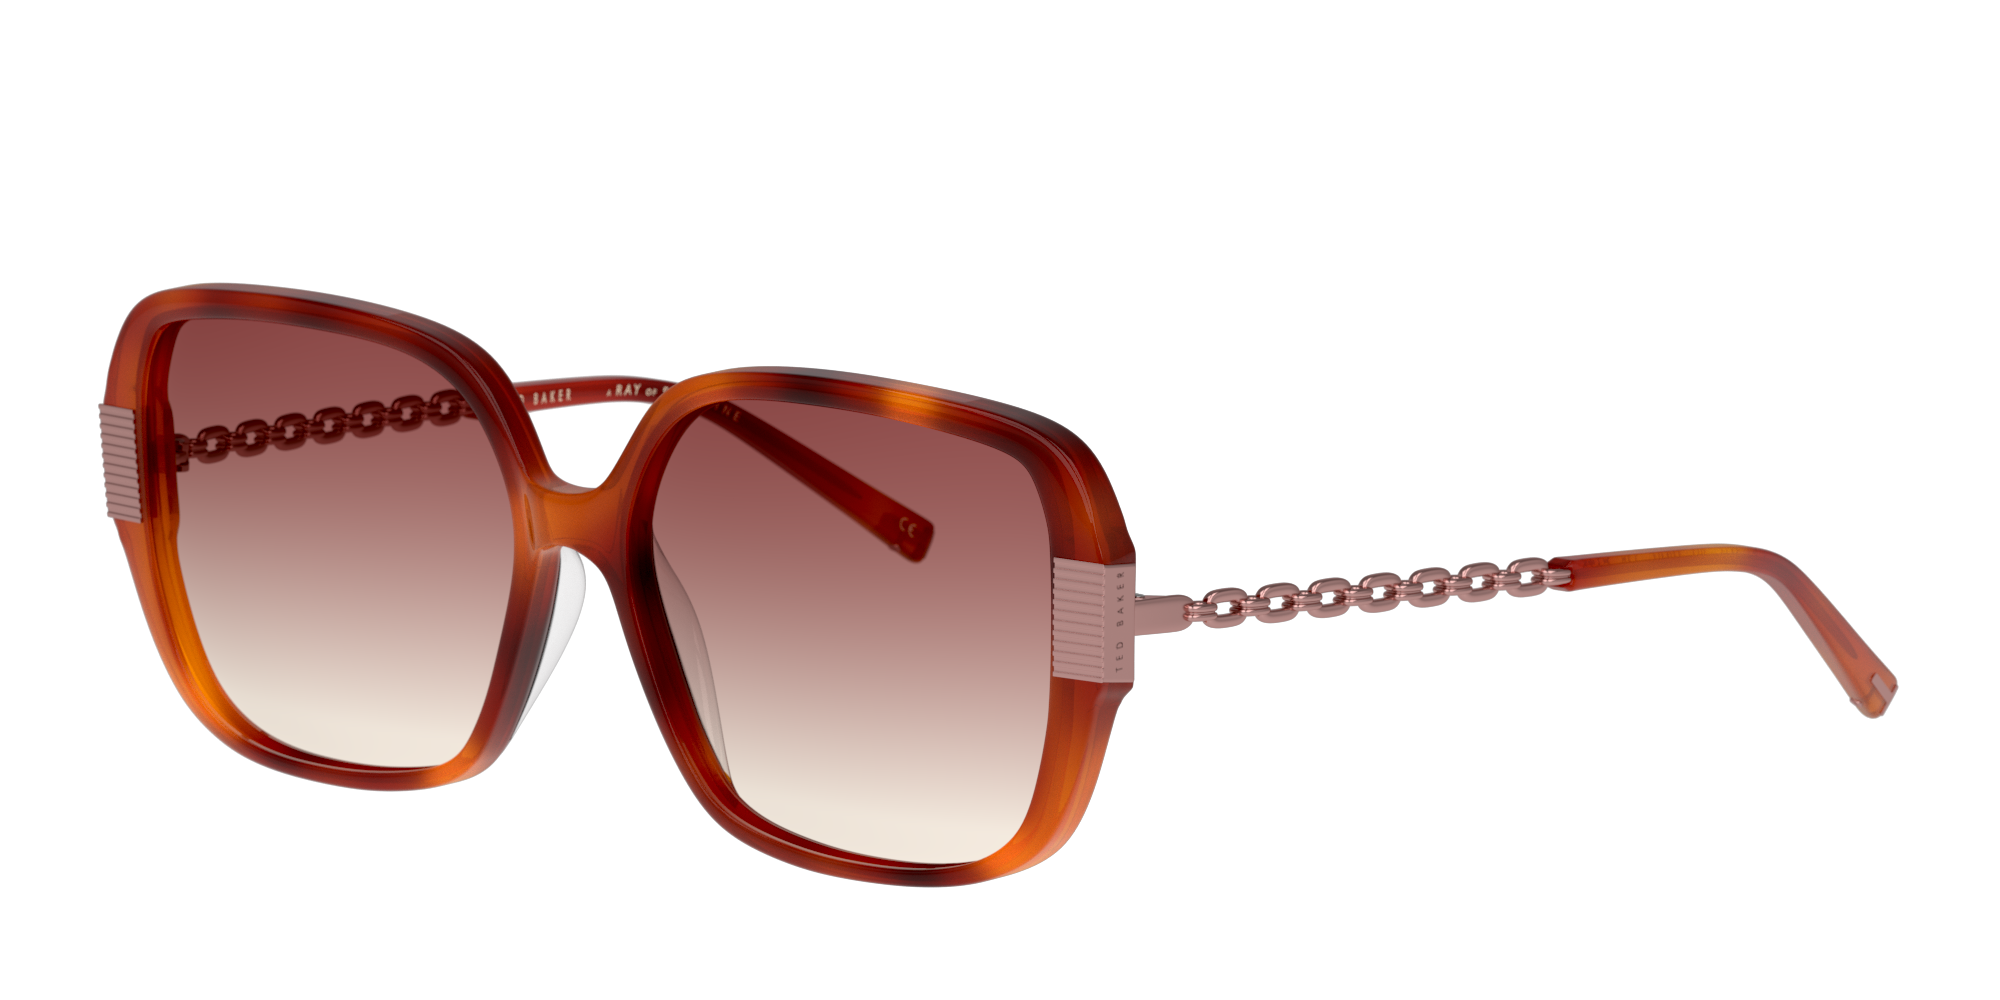 Angle_Left01 Ted Baker Indi TB 1616 (307) Sunglasses Brown / Brown